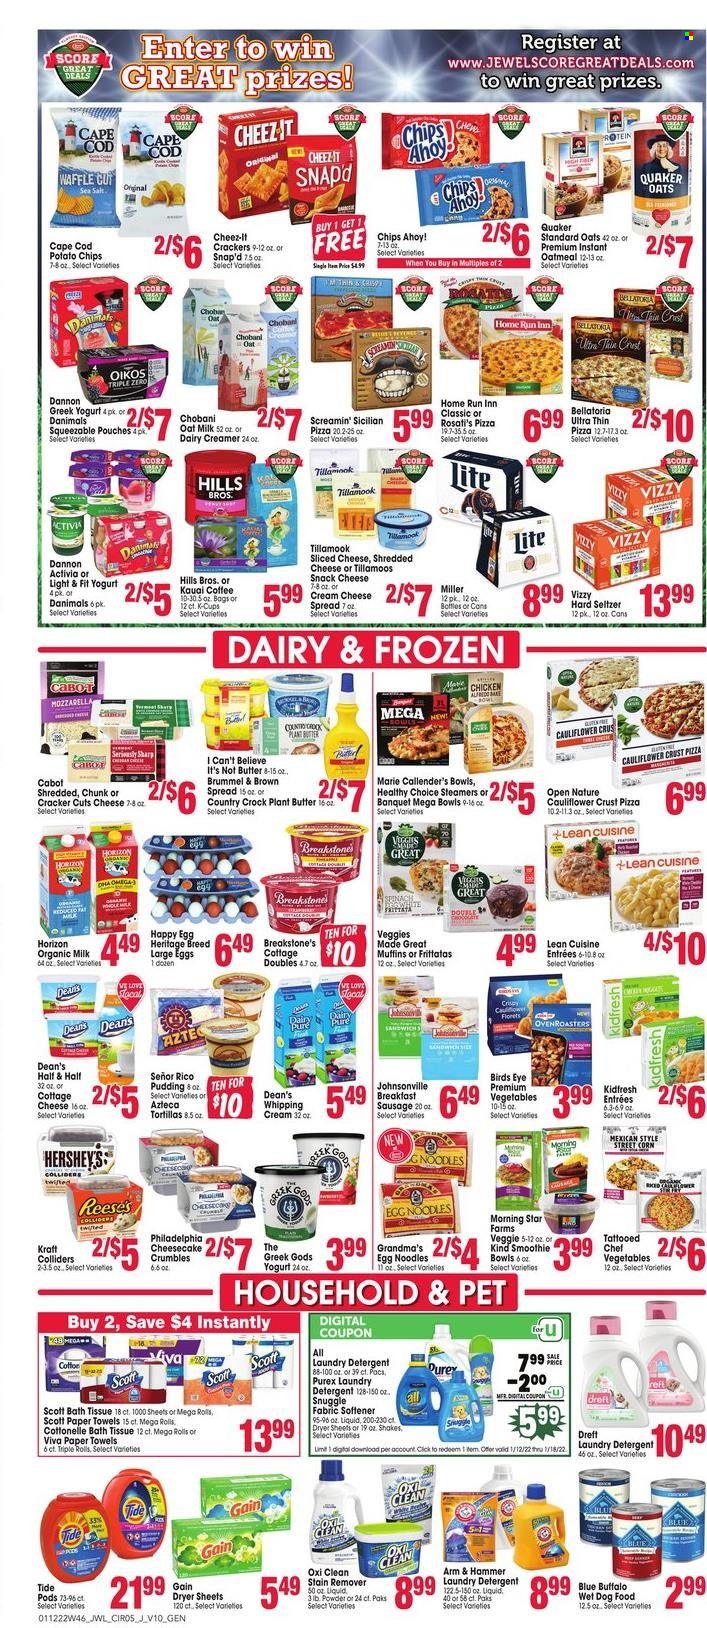 thumbnail - Jewel Osco Flyer - 01/12/2022 - 01/18/2022 - Sales products - tortillas, cheesecake, muffin, cod, pizza, Bird's Eye, Quaker, noodles, Lean Cuisine, Healthy Choice, Marie Callender's, Kraft®, Johnsonville, sausage, cheese spread, cottage cheese, cream cheese, shredded cheese, sliced cheese, Philadelphia, greek yoghurt, pudding, yoghurt, Activia, Oikos, Chobani, Dannon, Danimals, organic milk, shake, oat milk, large eggs, butter, I Can't Believe It's Not Butter, creamer, whipping cream, Reese's, Hershey's, Screamin' Sicilian, Bellatoria, snack, crackers, Chips Ahoy!, potato chips, Cheez-It, ARM & HAMMER, oatmeal, egg noodles, smoothie, coffee, coffee capsules, K-Cups, Hard Seltzer, Miller, bath tissue, Cottonelle, Scott, kitchen towels, paper towels, detergent, Gain, stain remover, Snuggle, Tide, fabric softener, laundry detergent, dryer sheets, Purex, bag, Sharp, animal food, Blue Buffalo, dog food, wet dog food, Hill's, Half and half. Page 5.